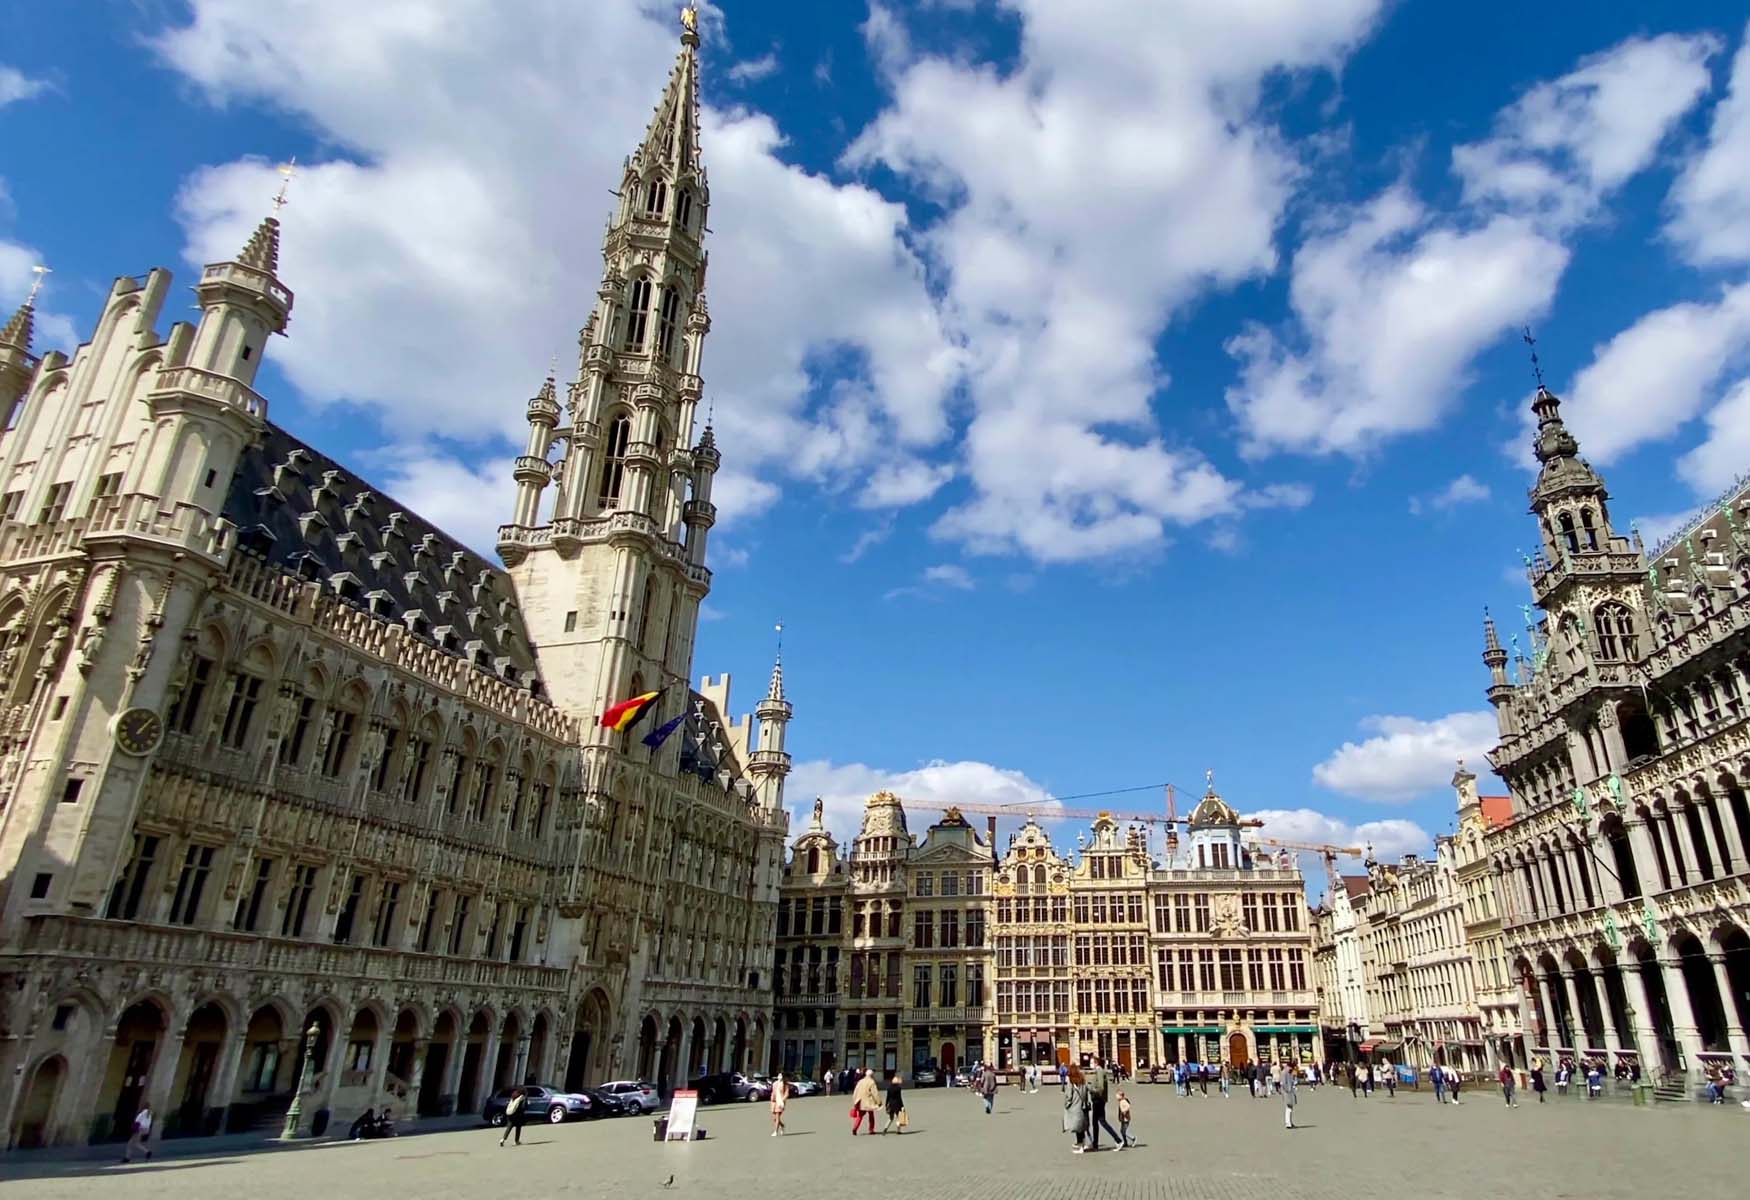 Tips for Visiting: Is Brussels Expensive? | TravelRight